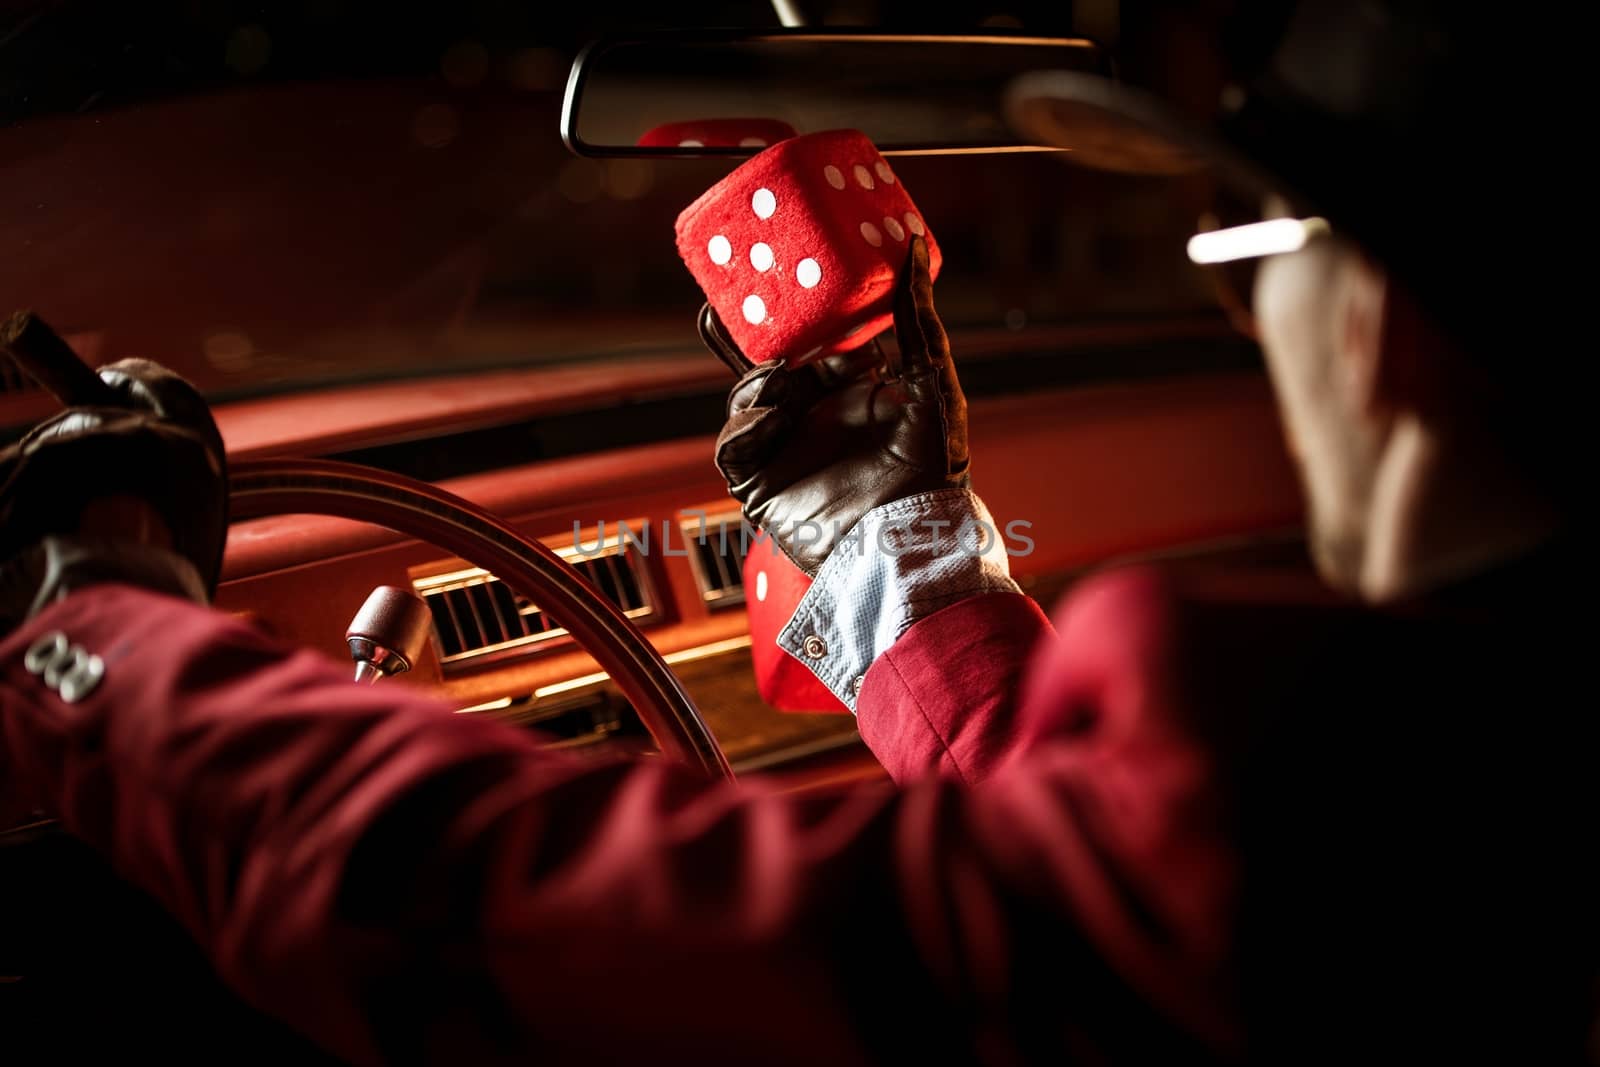 Casino Lucky Wish Concept. Casino Poker Player Talking to His Lucky Red Dice Inside the Classic Car.